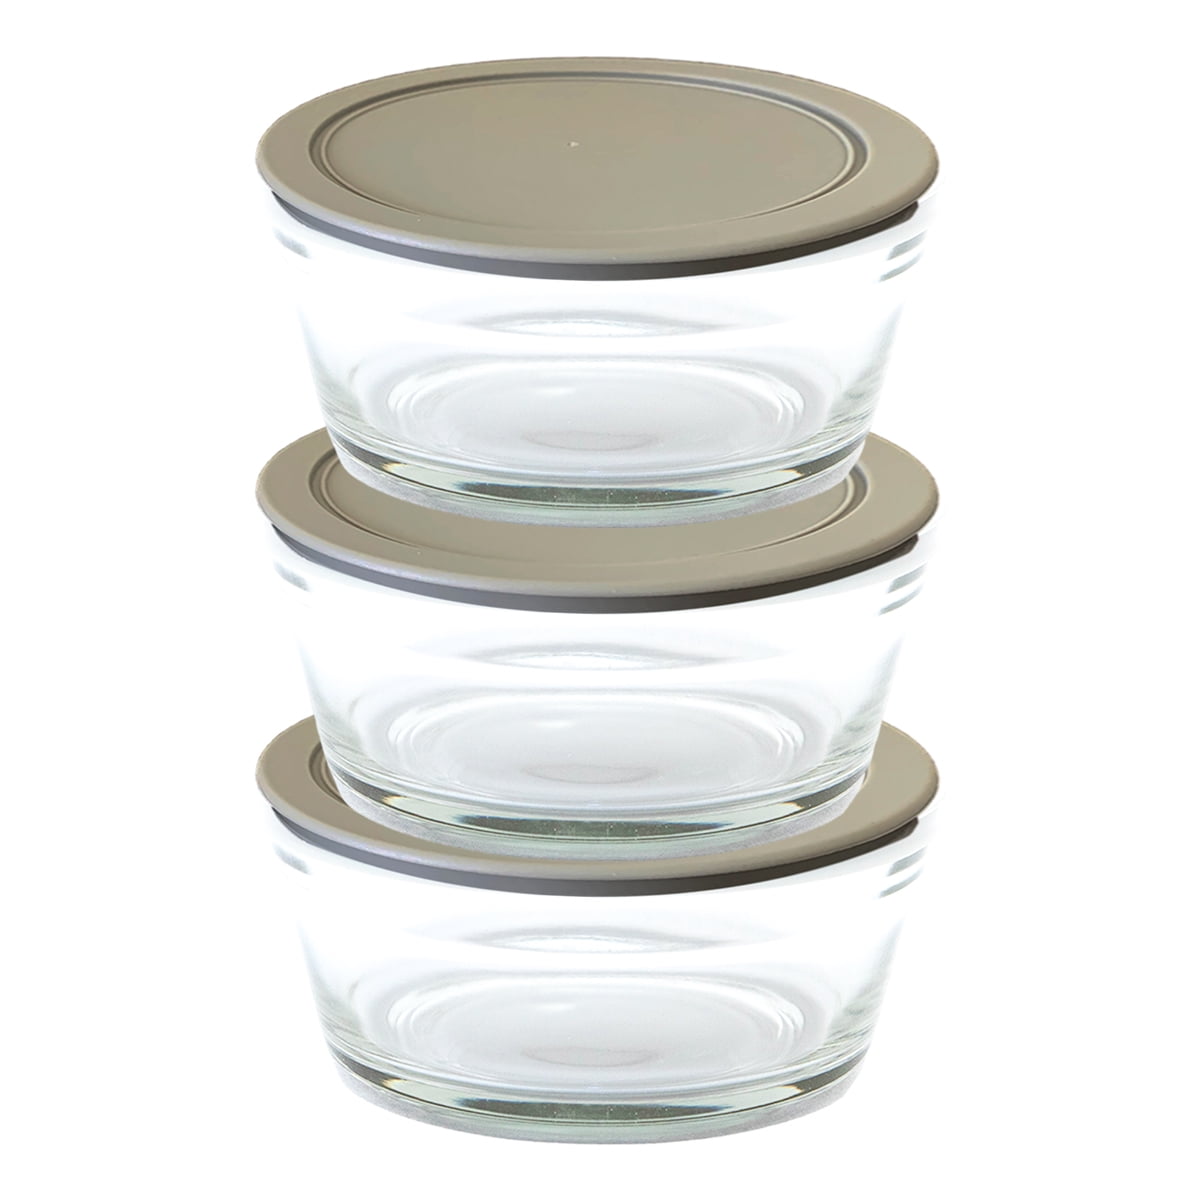 Homearray Kitchen Glass Mixing Bowls with Lids Set for Food Prep Storage and Mixing Fruits, Salads, Meats, Powders, and More - Durable Glass Nesting